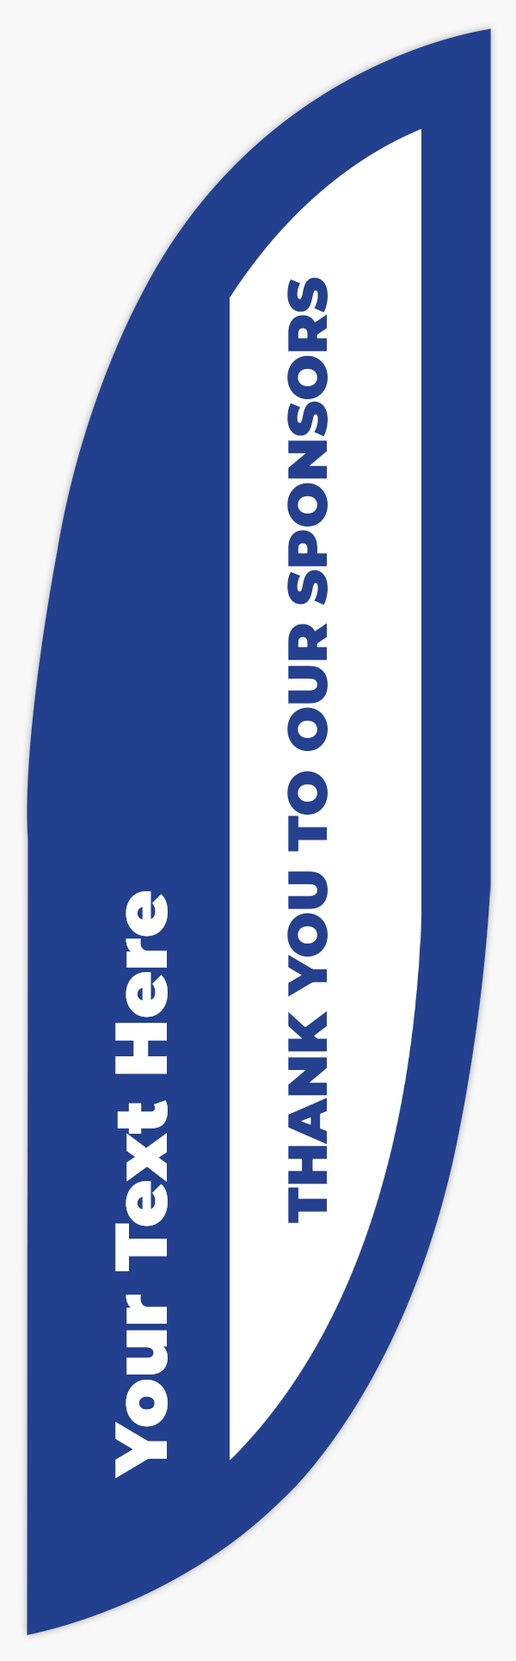 A vertical fundraiser blue white design for General Party